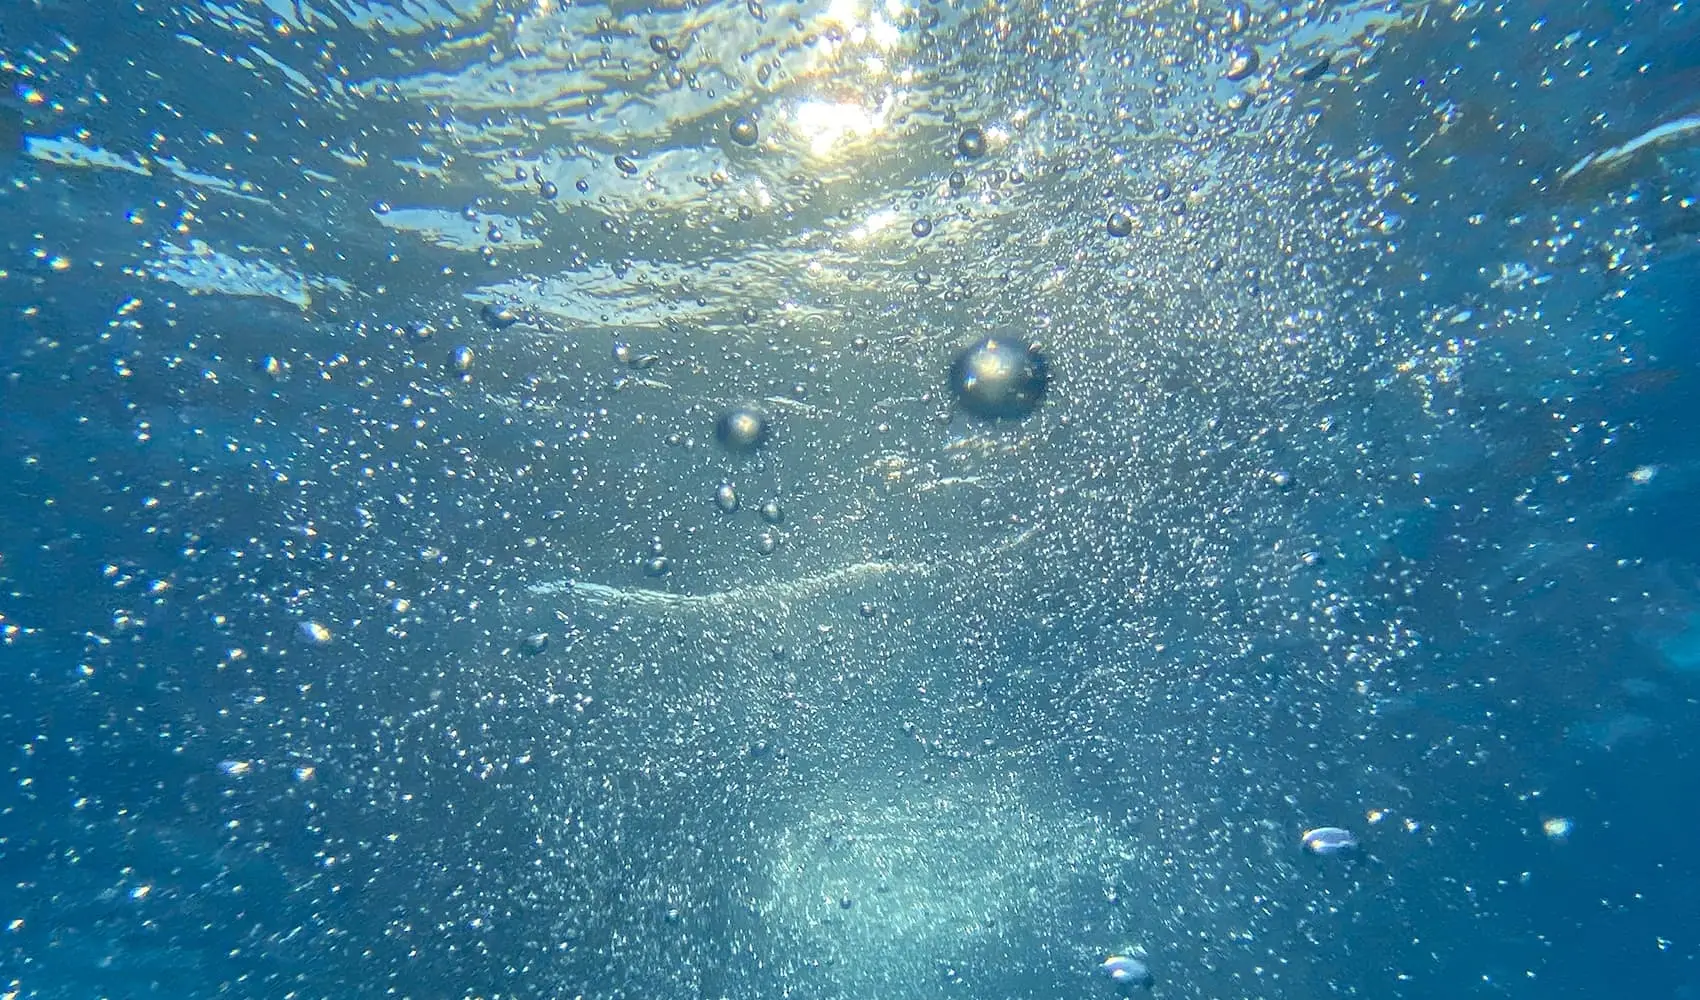 Sunlight filtering through water with bubbles, creating a serene underwater scene.